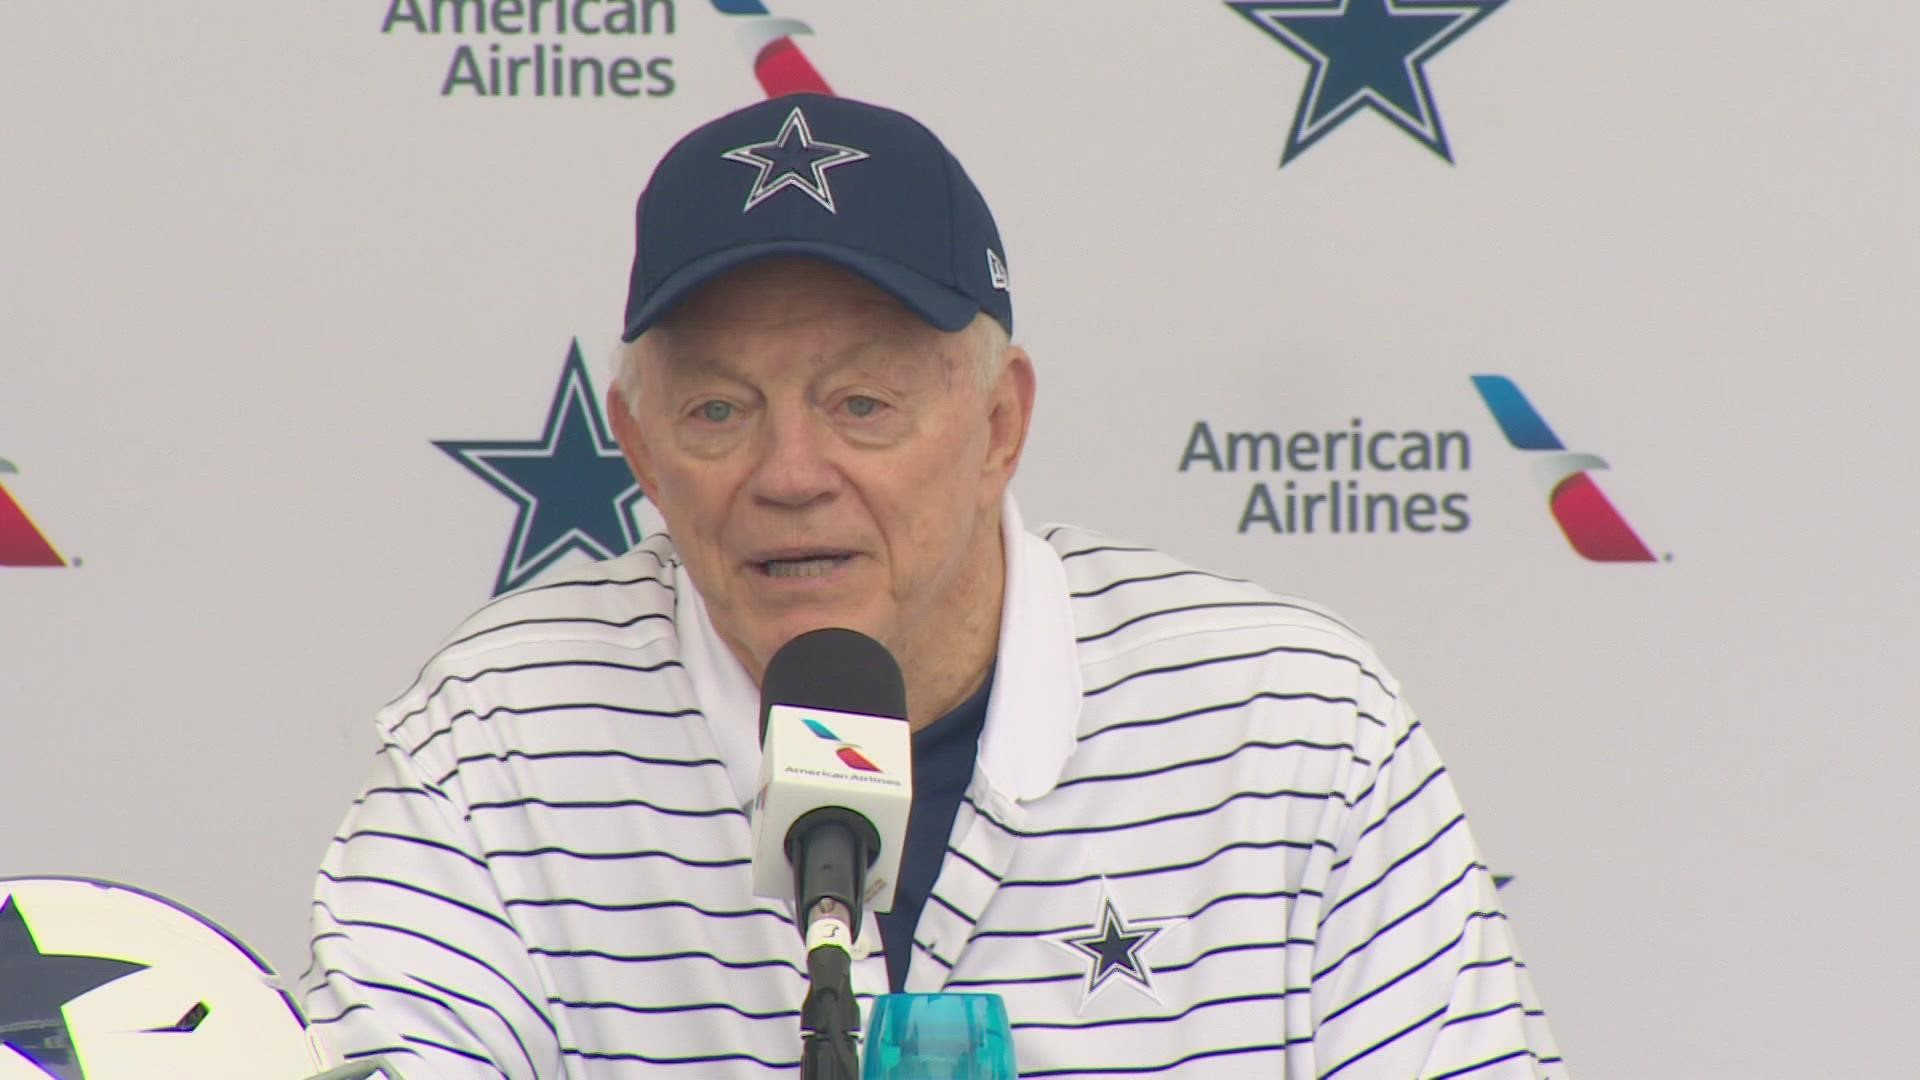 Training camp for the Dallas Cowboys has commenced with Jerry Jones holding court from Oxnard, California to set the stage for the 2022 season.